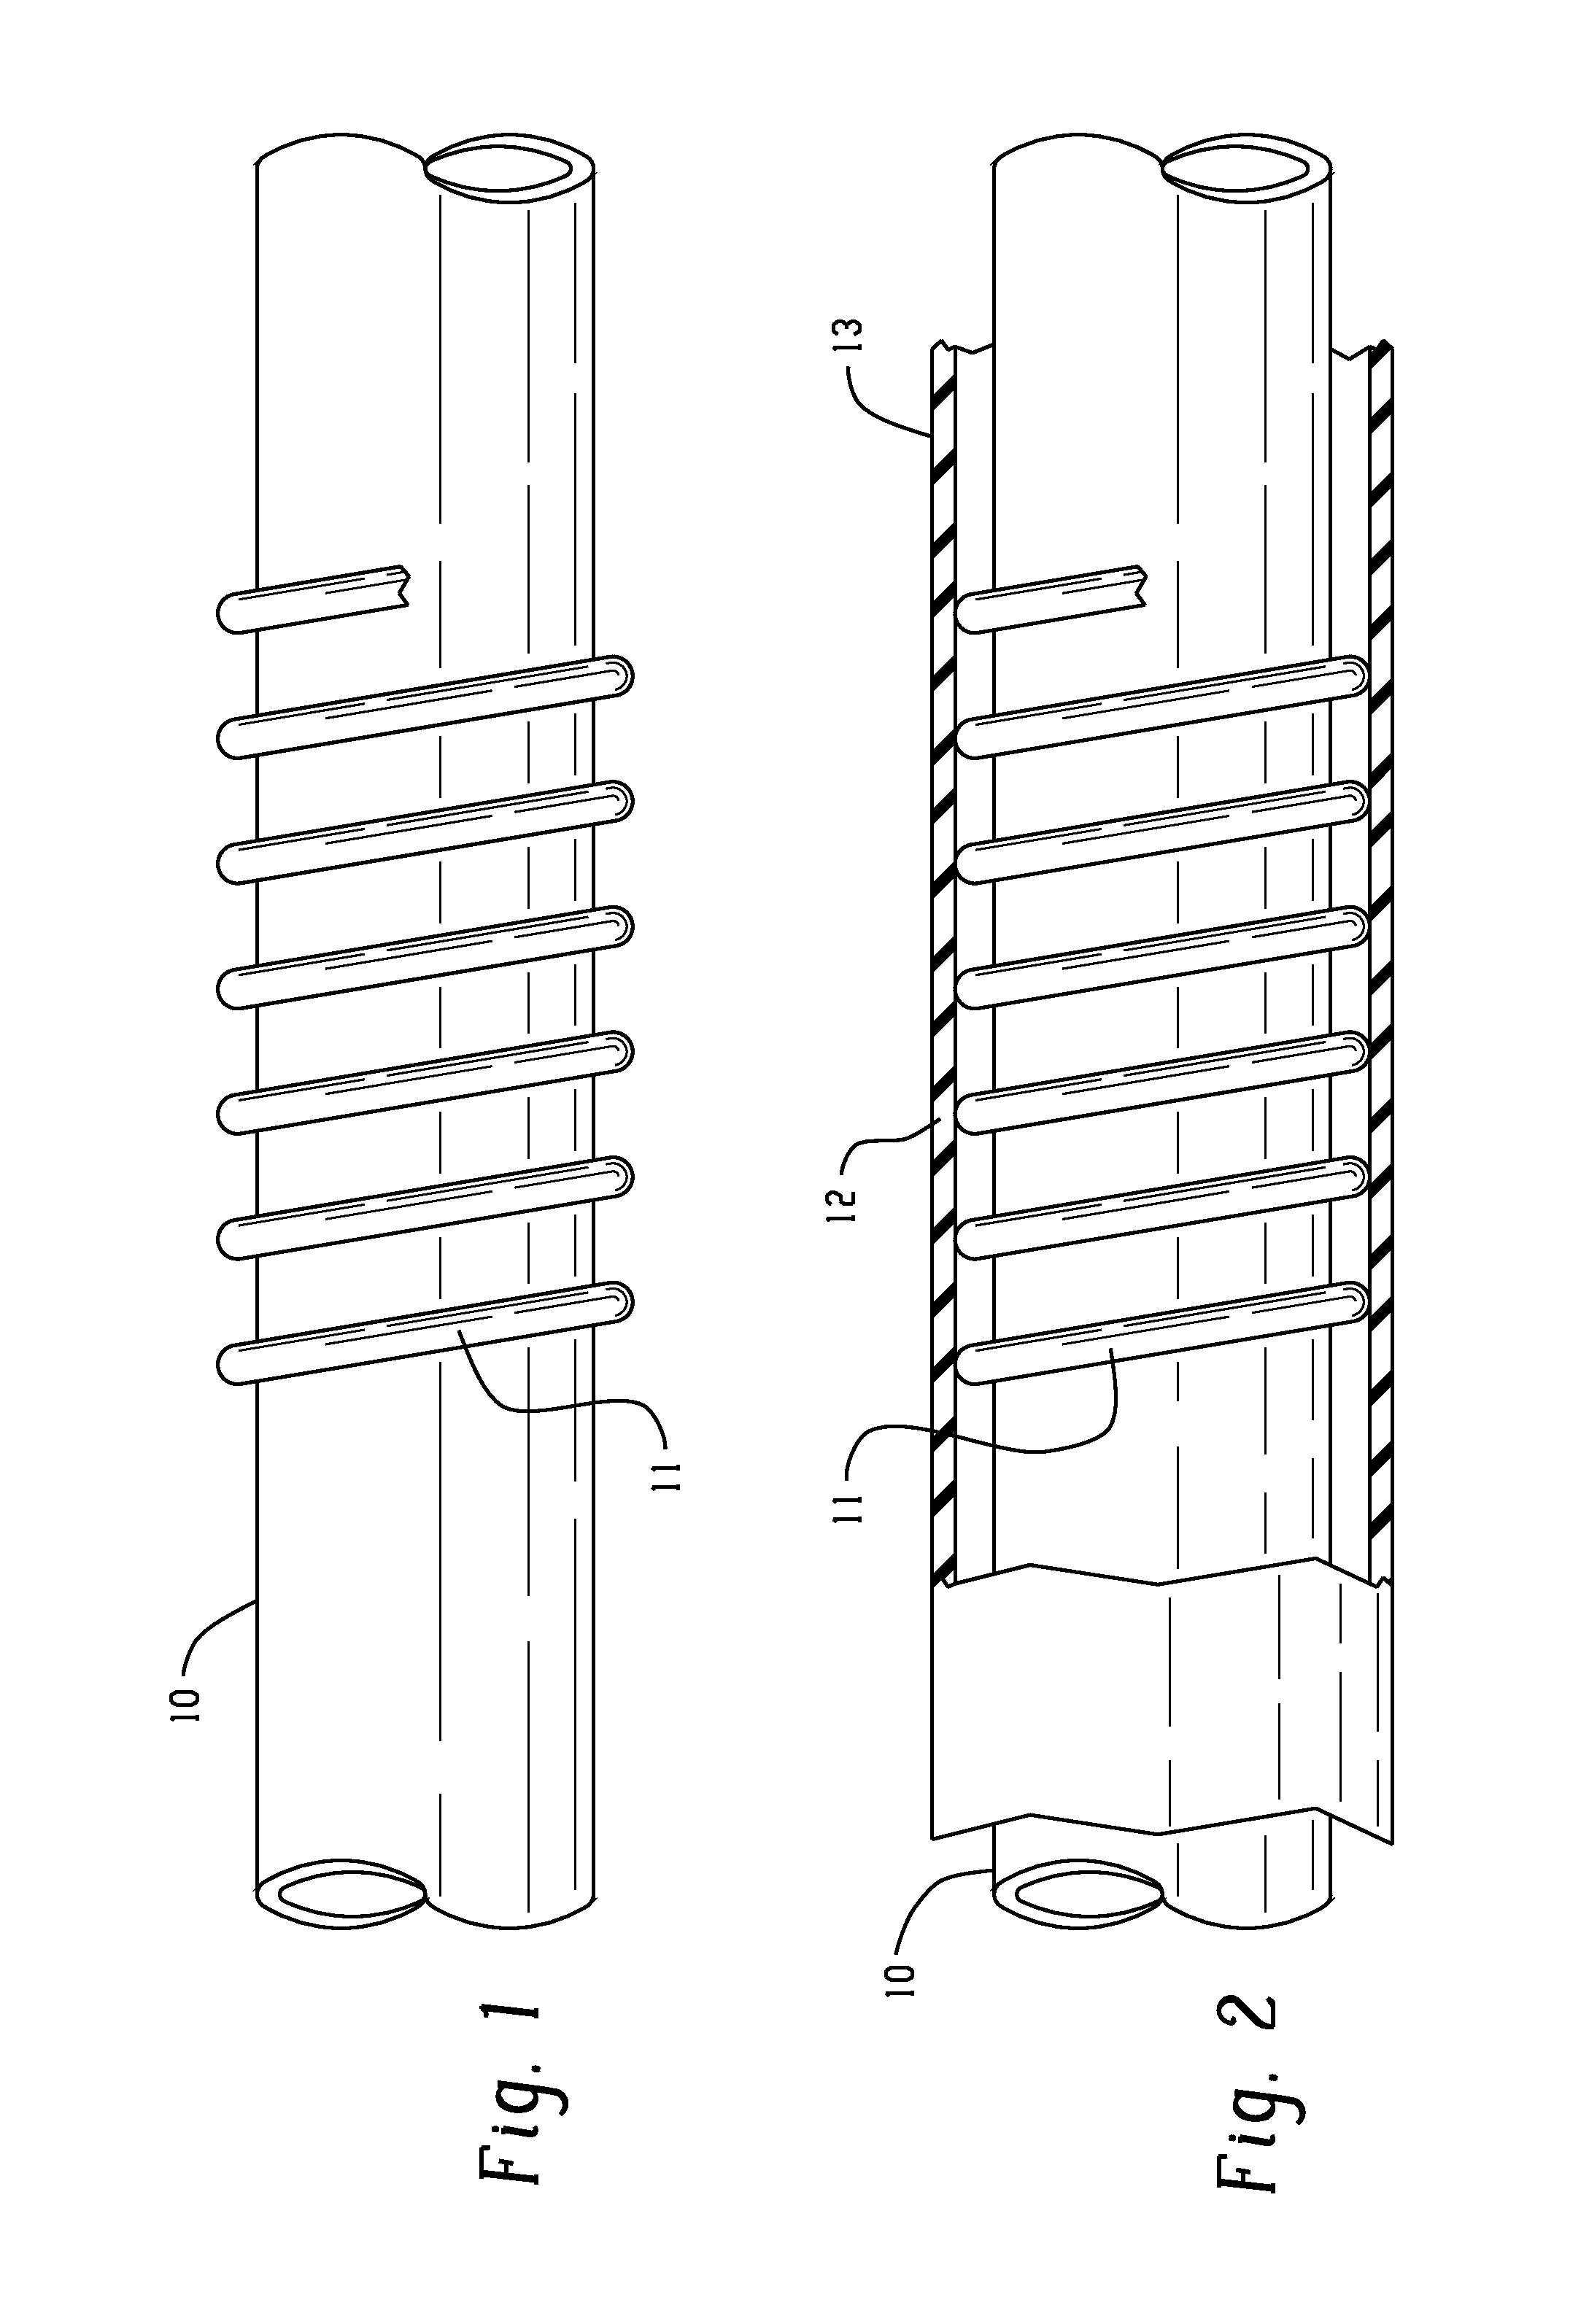 Reinforced flexible tubing and method of making same